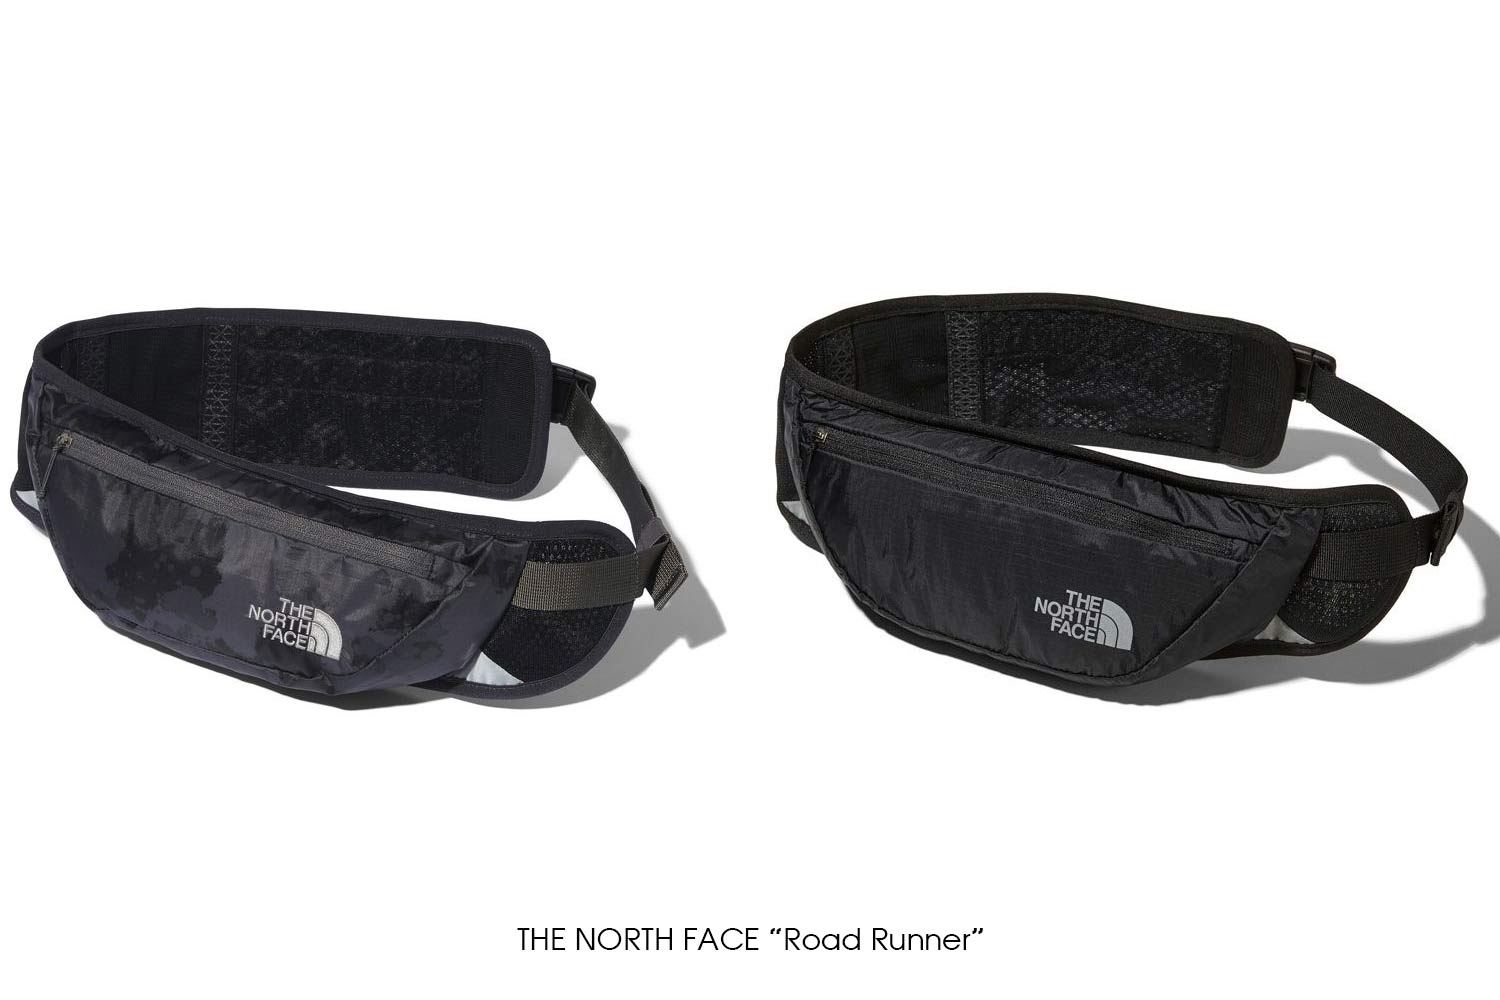 THE NORTH FACE "Road Runner"